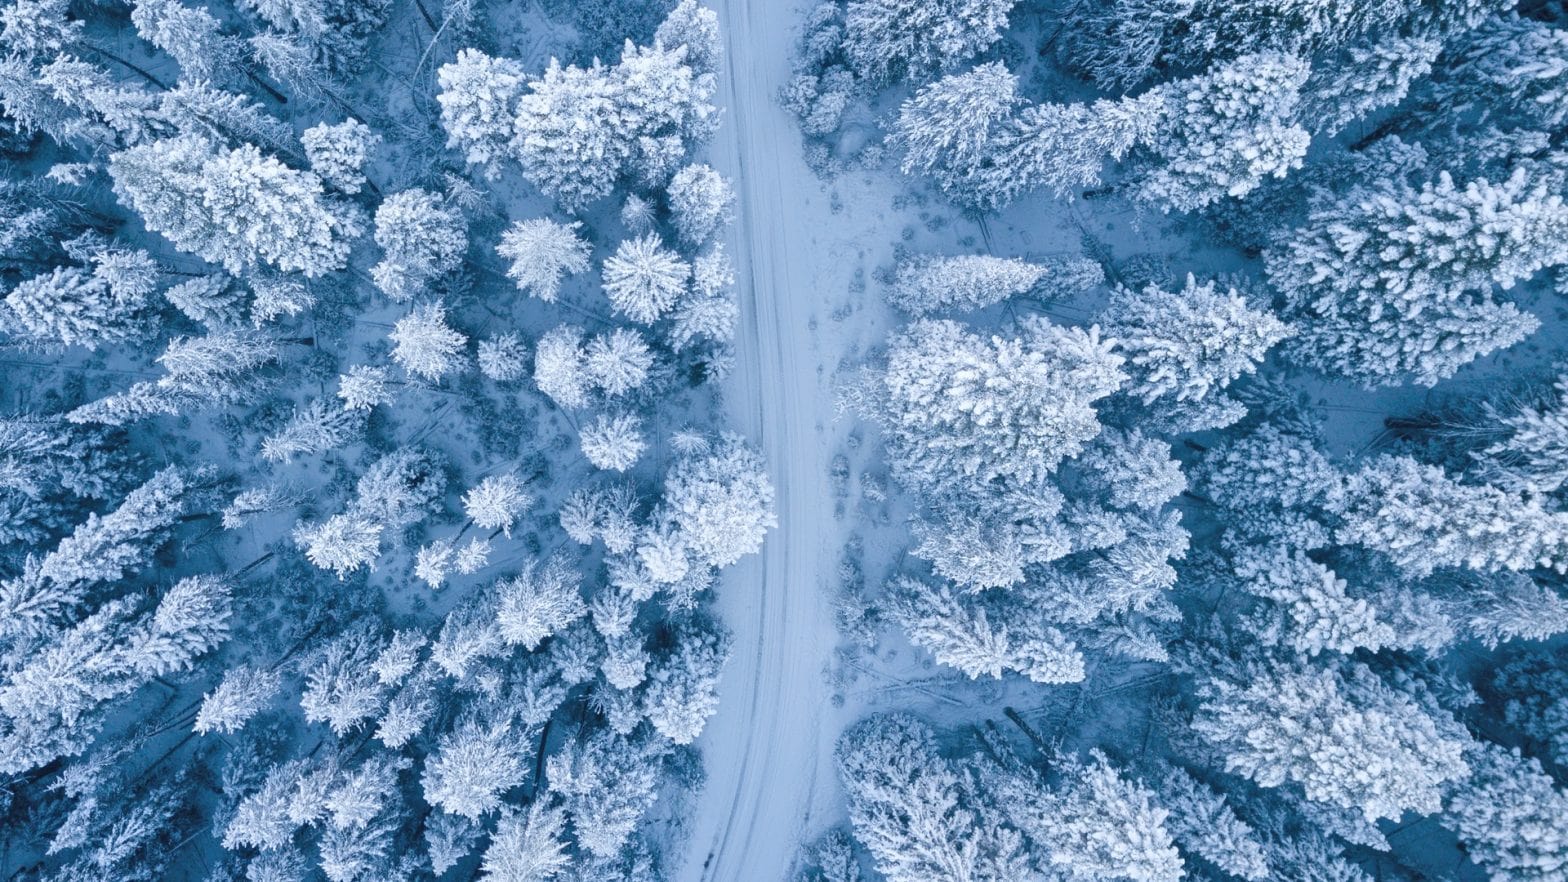 5 Tips for Driving on Winter Roads